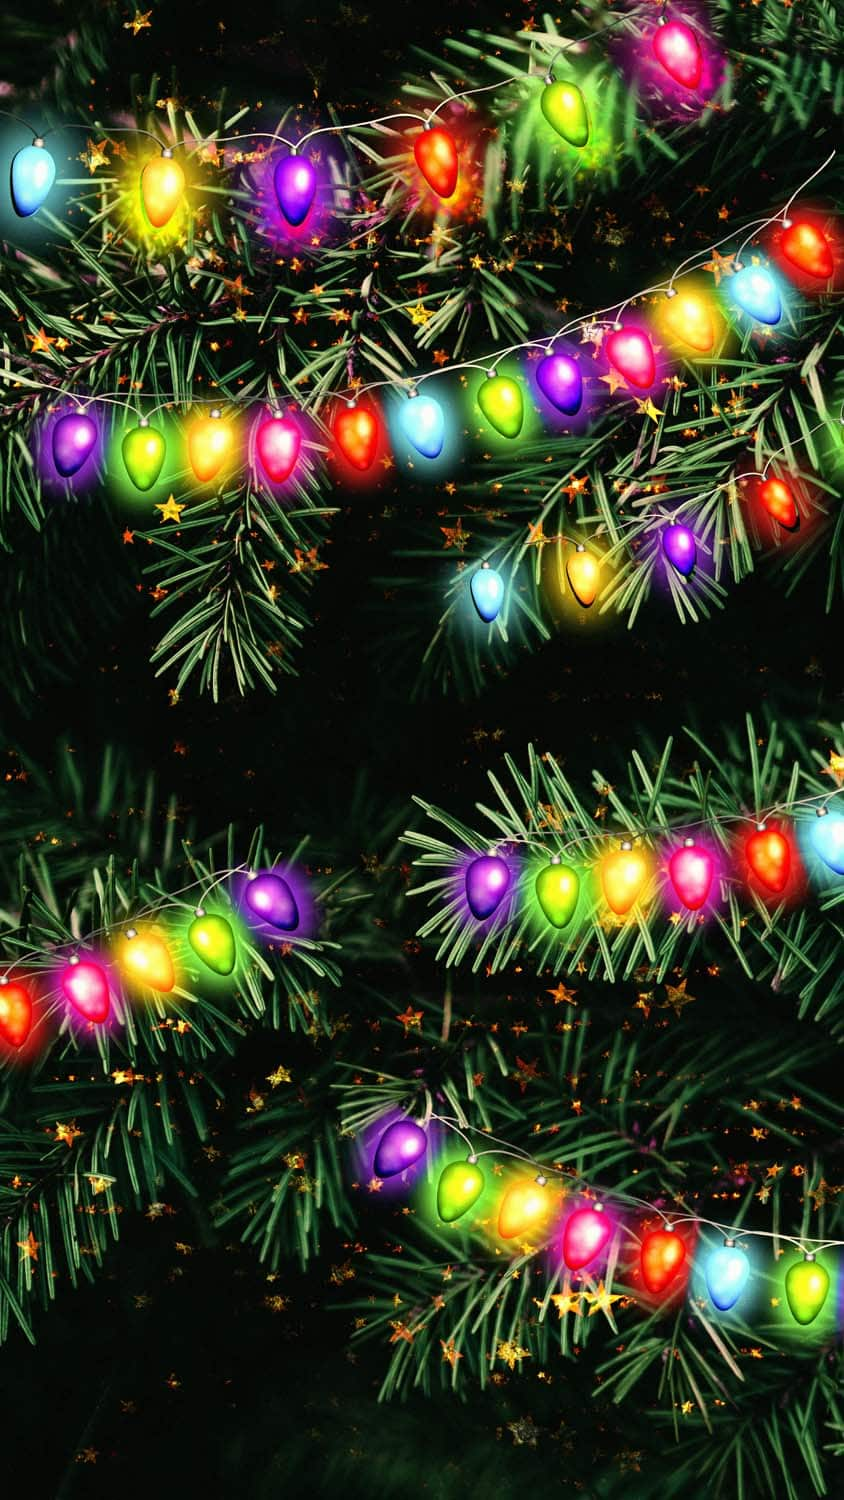 LED Lights Christmas Tree IPhone Wallpaper HD  IPhone Wallpapers